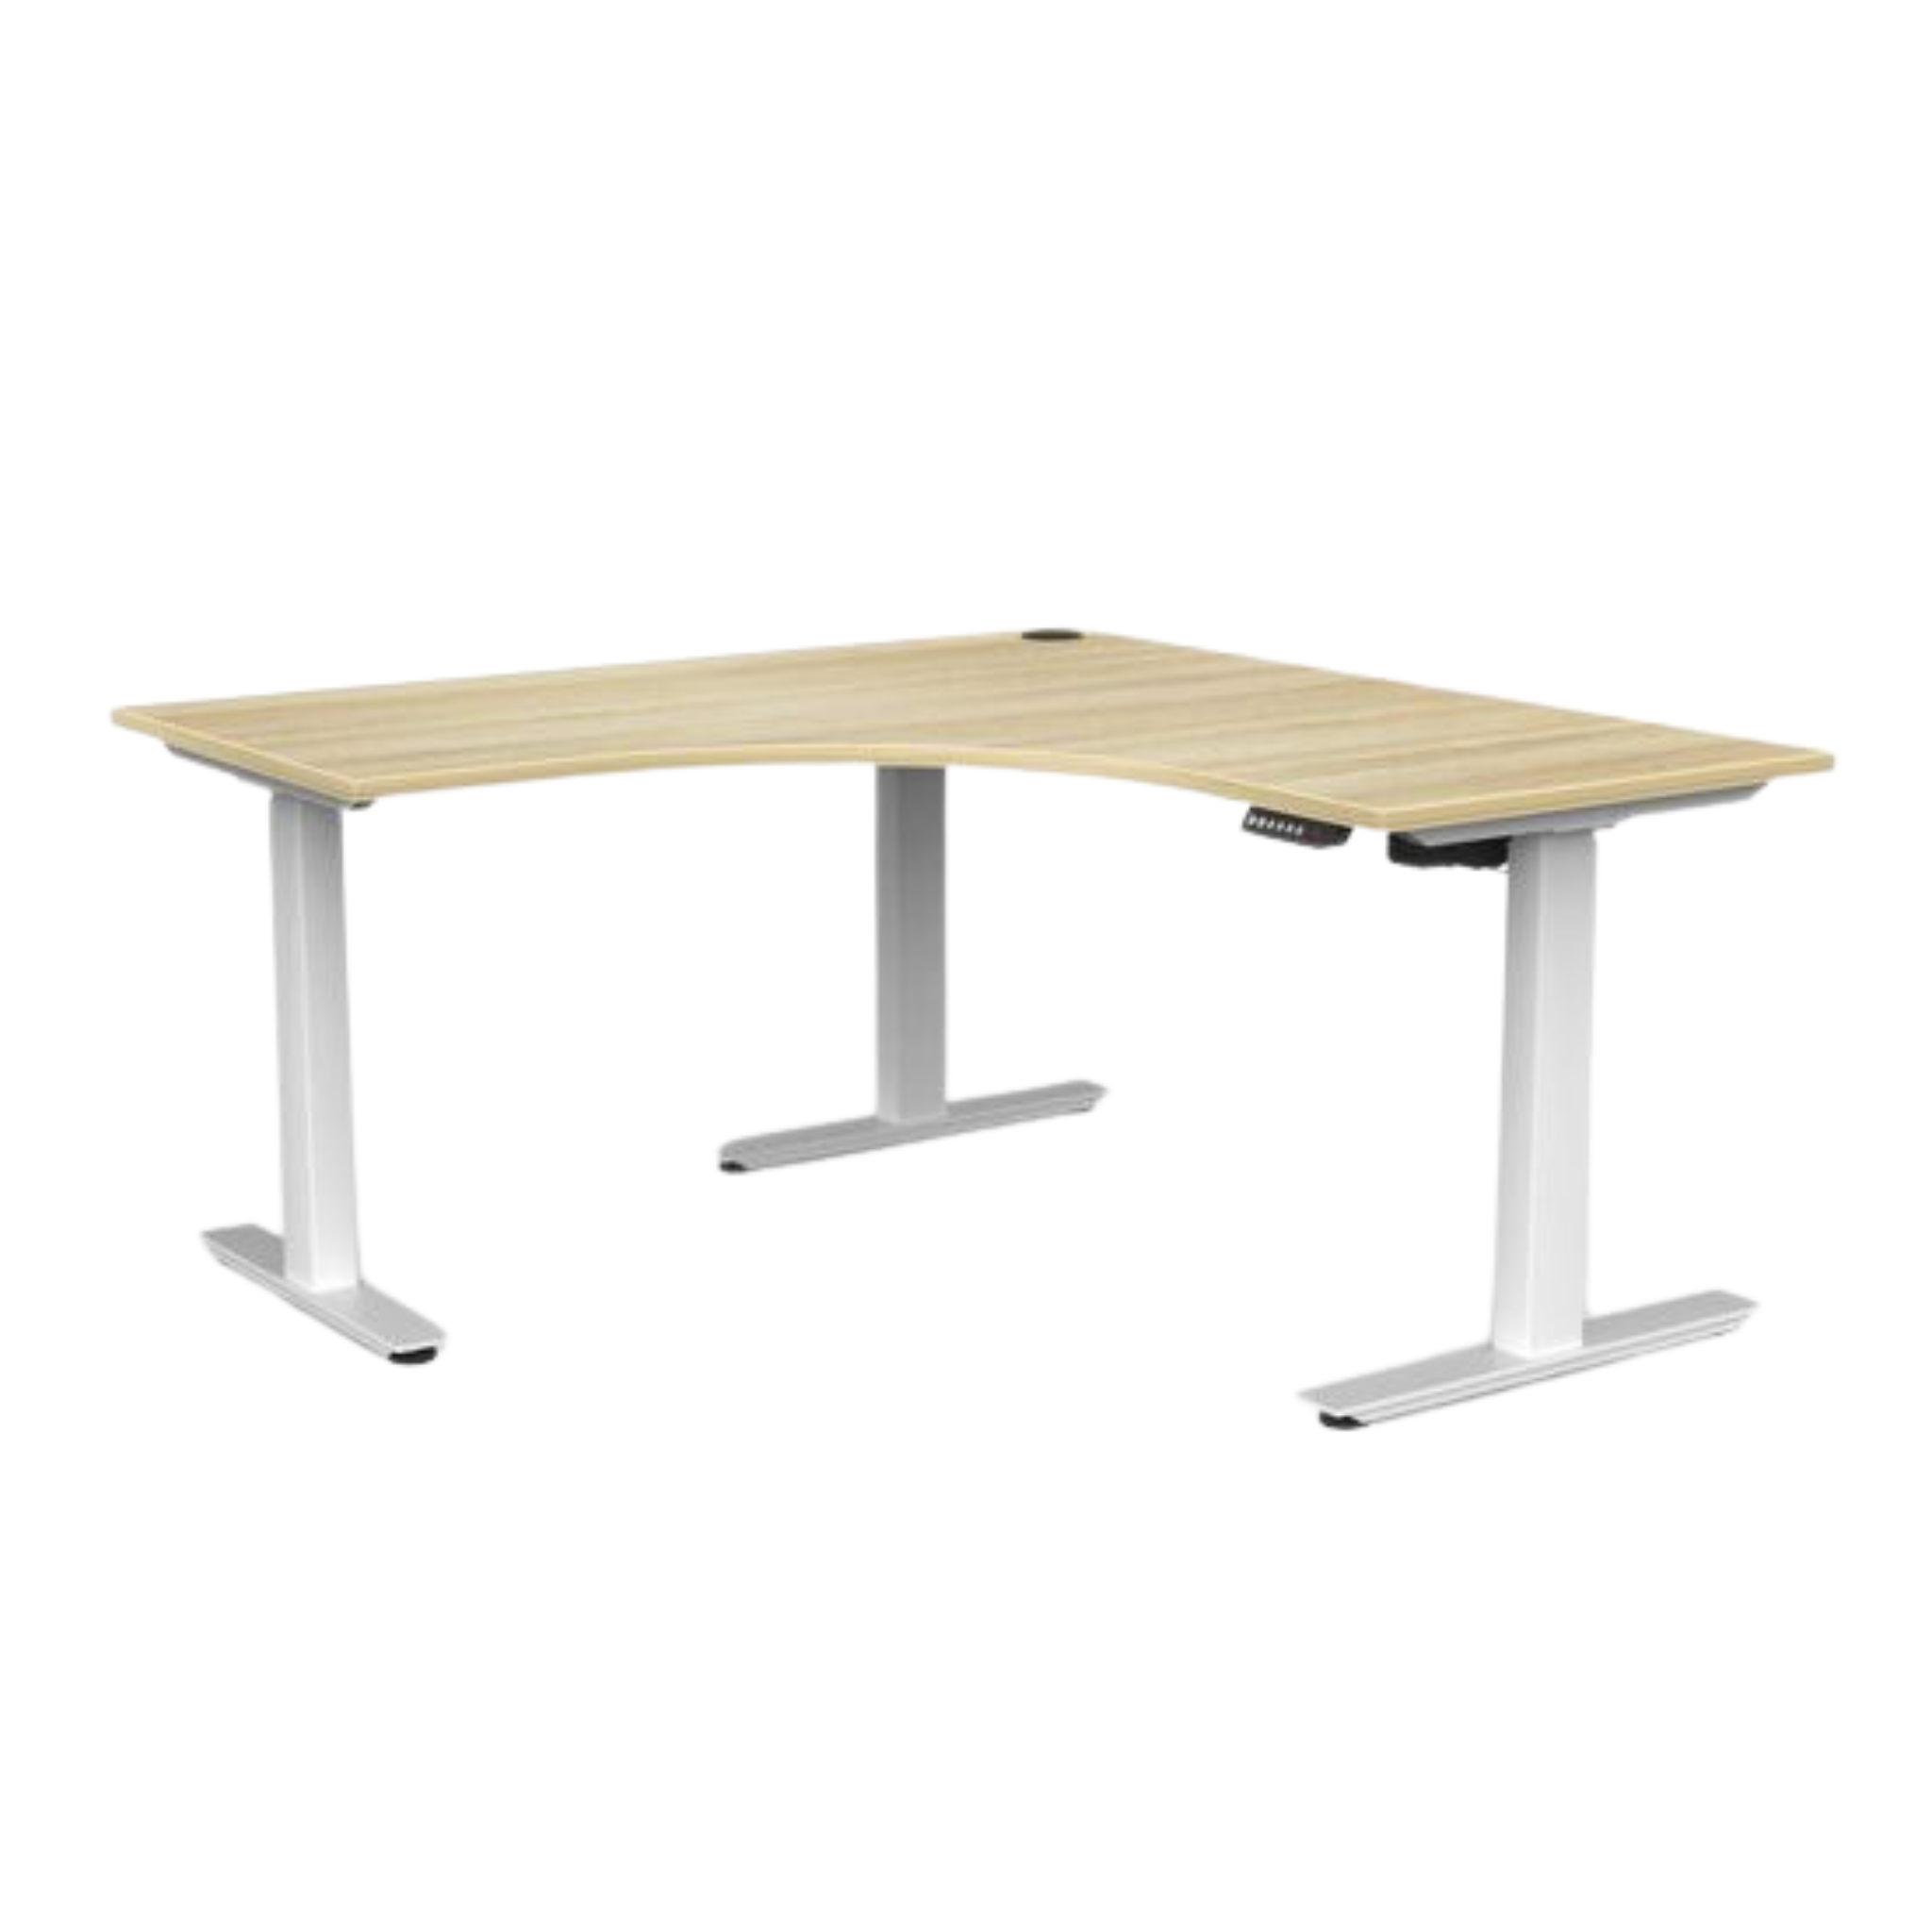 Agile 2 corner workstation with white frame and atlantic oak top